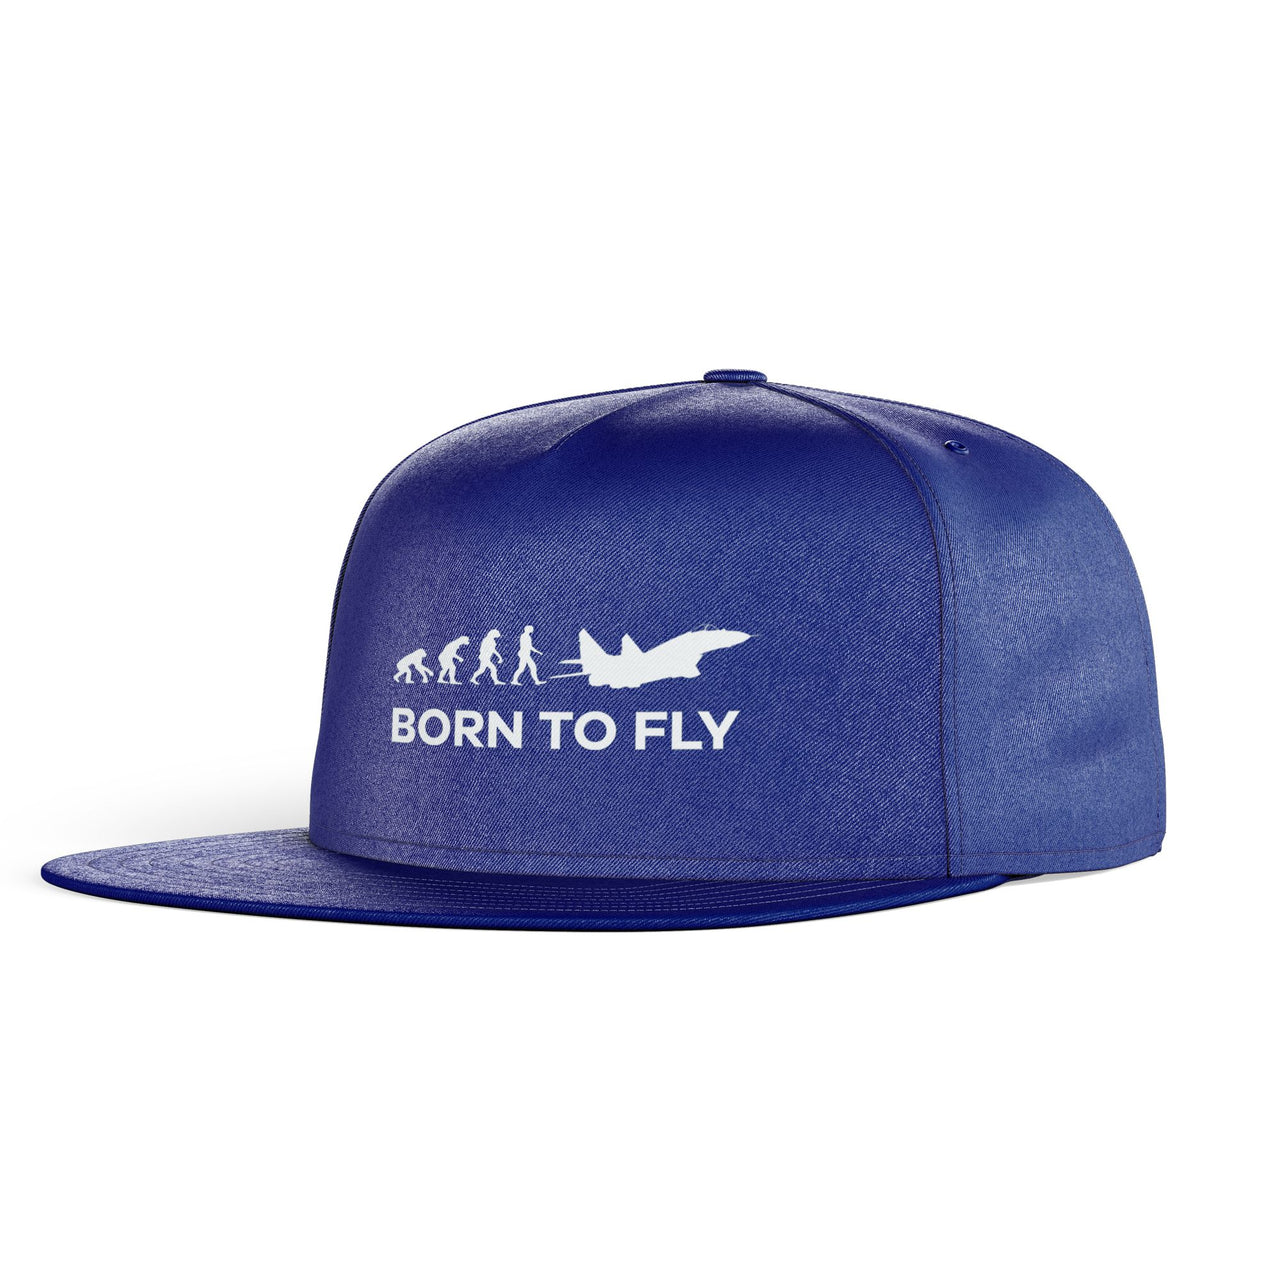 Born To Fly Military Designed Snapback Caps & Hats